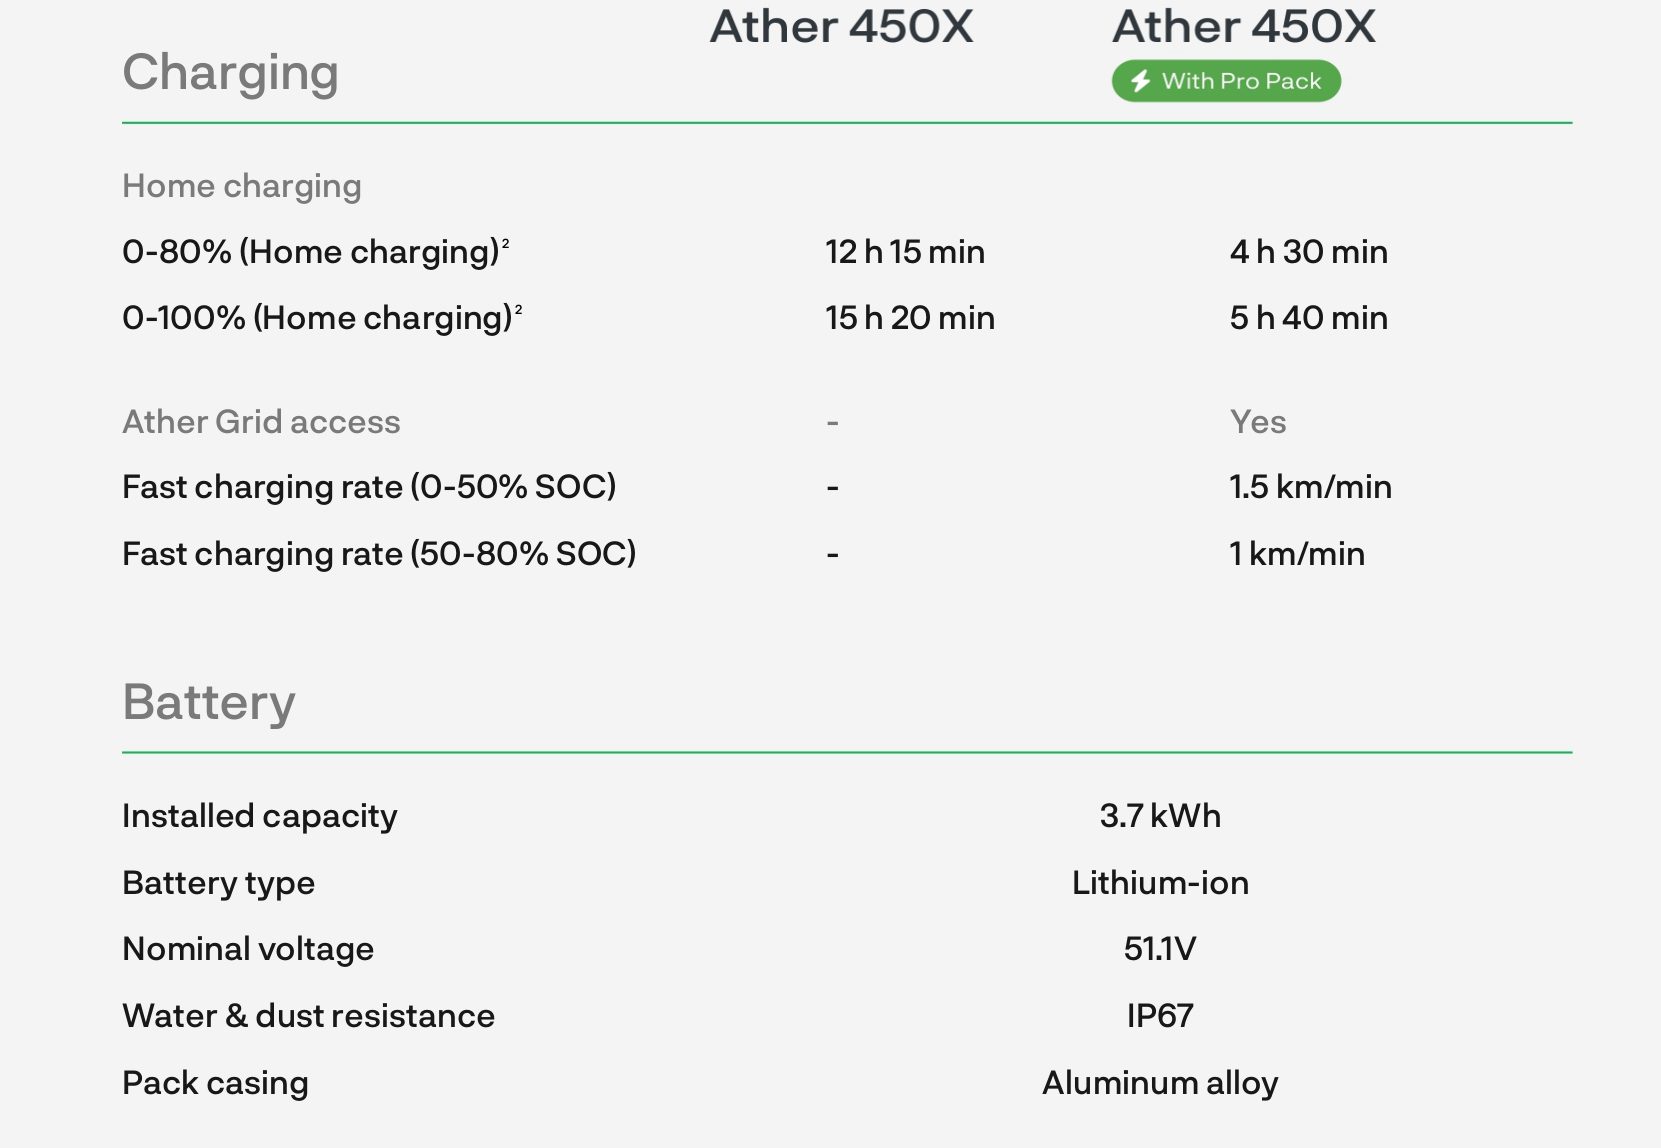 ather 450x vs 450x propack charging